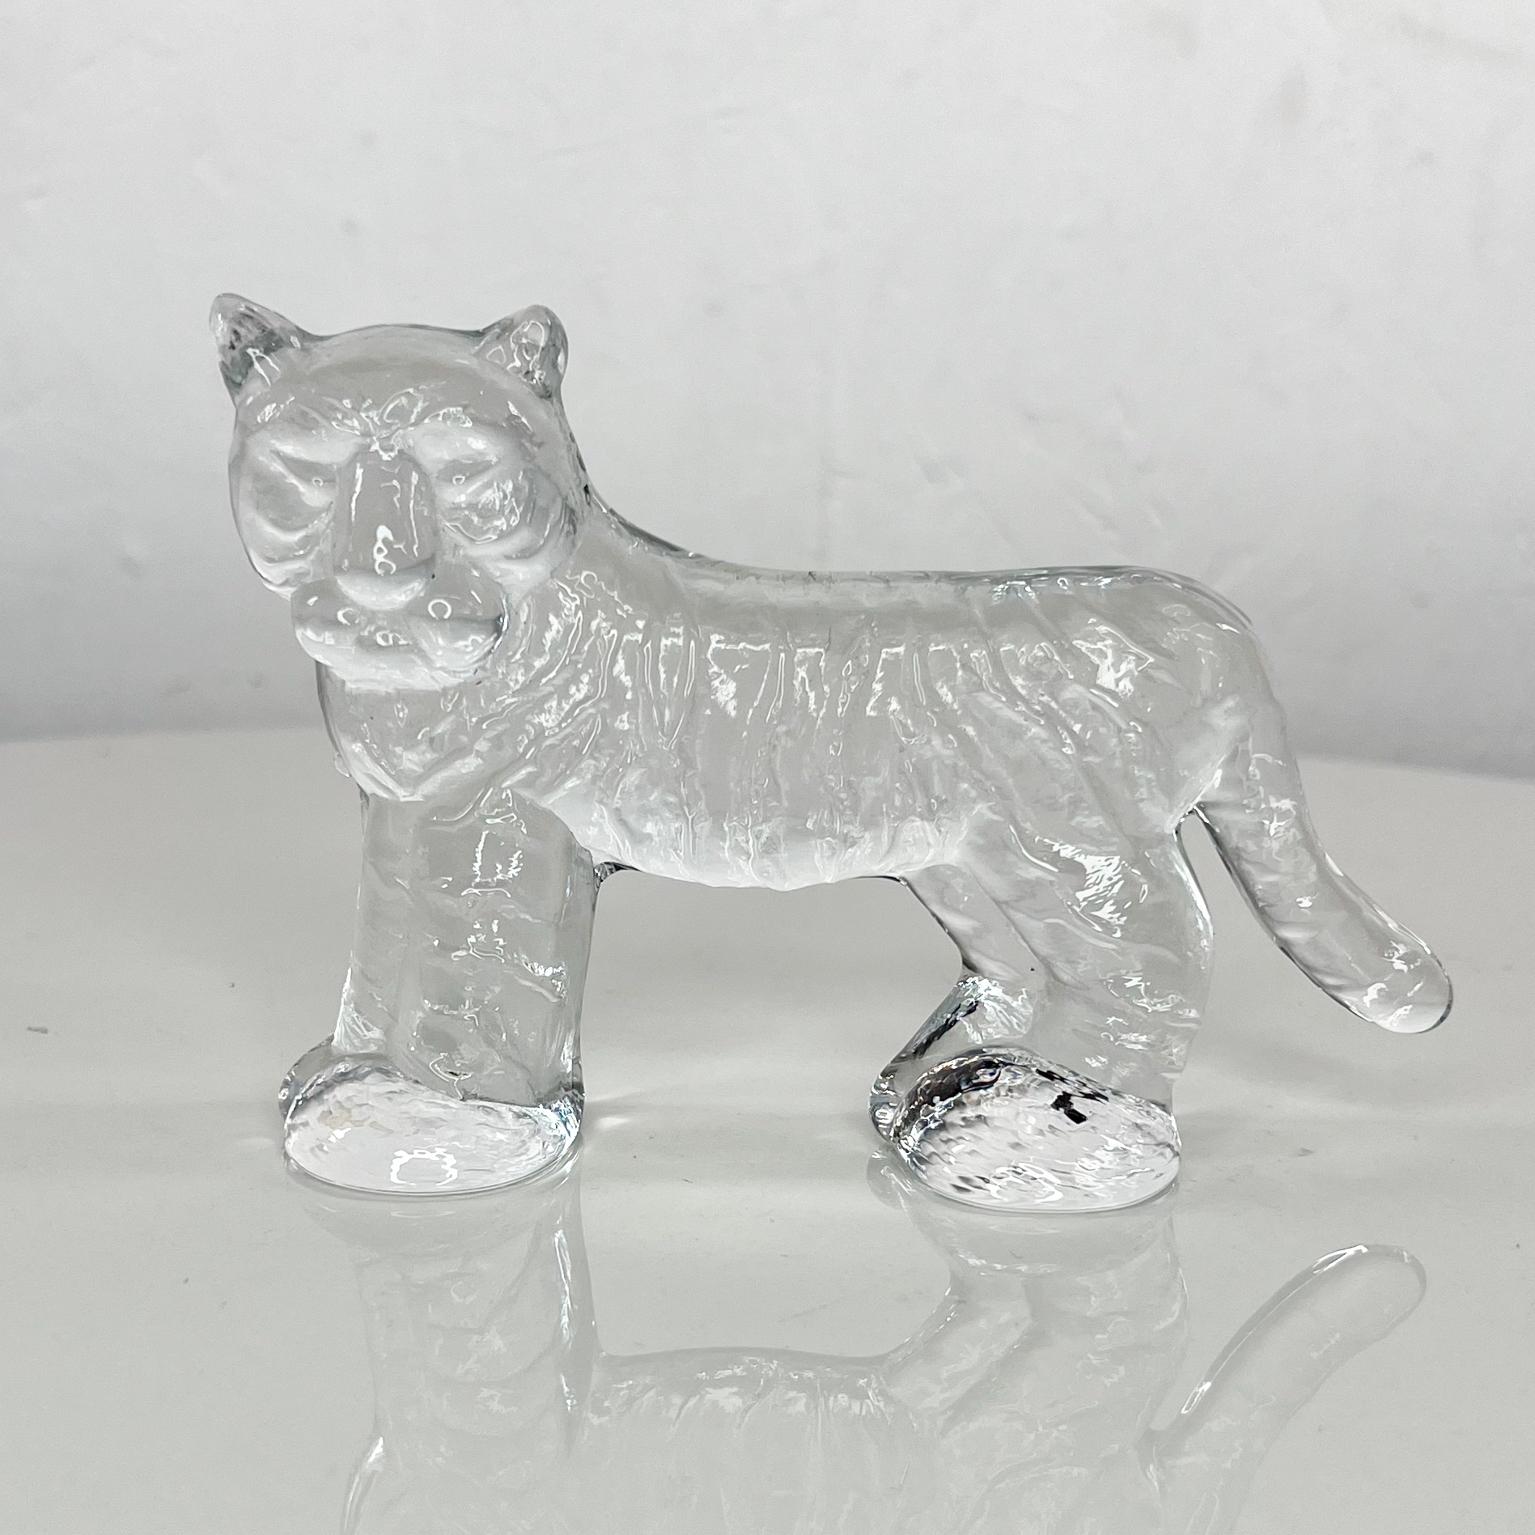 1980s Kosta Boda Sweden Crystal Art glass tiger paperweight by Bertil Vallien
Vintage glass tiger figurine paperweight Zoo Series designed by Bertil Vallien produced by Kosta Boda of Sweden.
Figurine has a flat back allowing it to be displayed